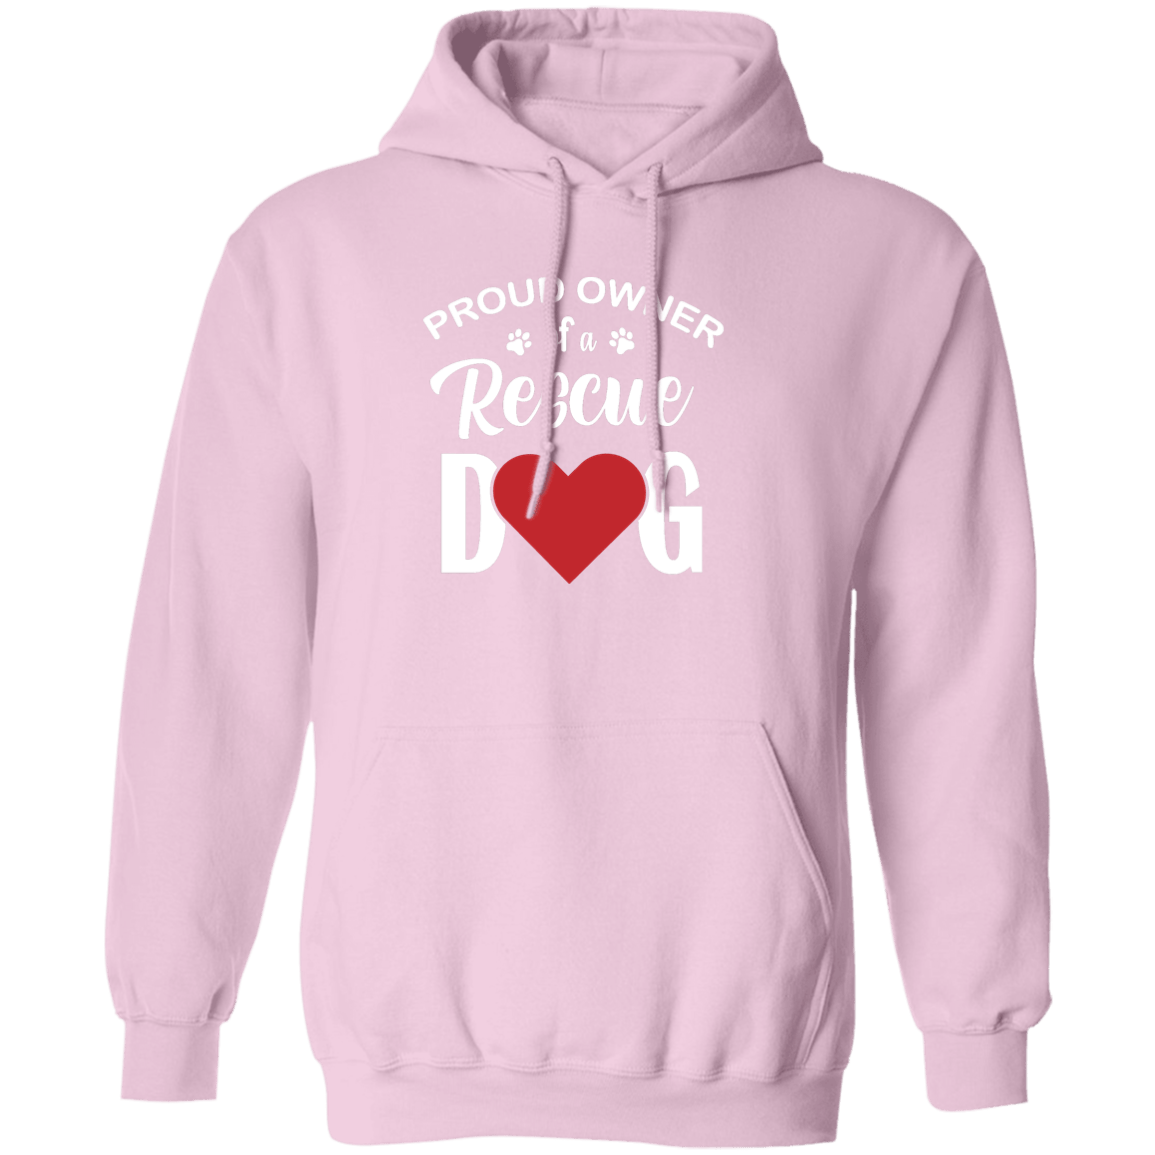 Proud Owner Of A Rescue Dog - Hoodie.